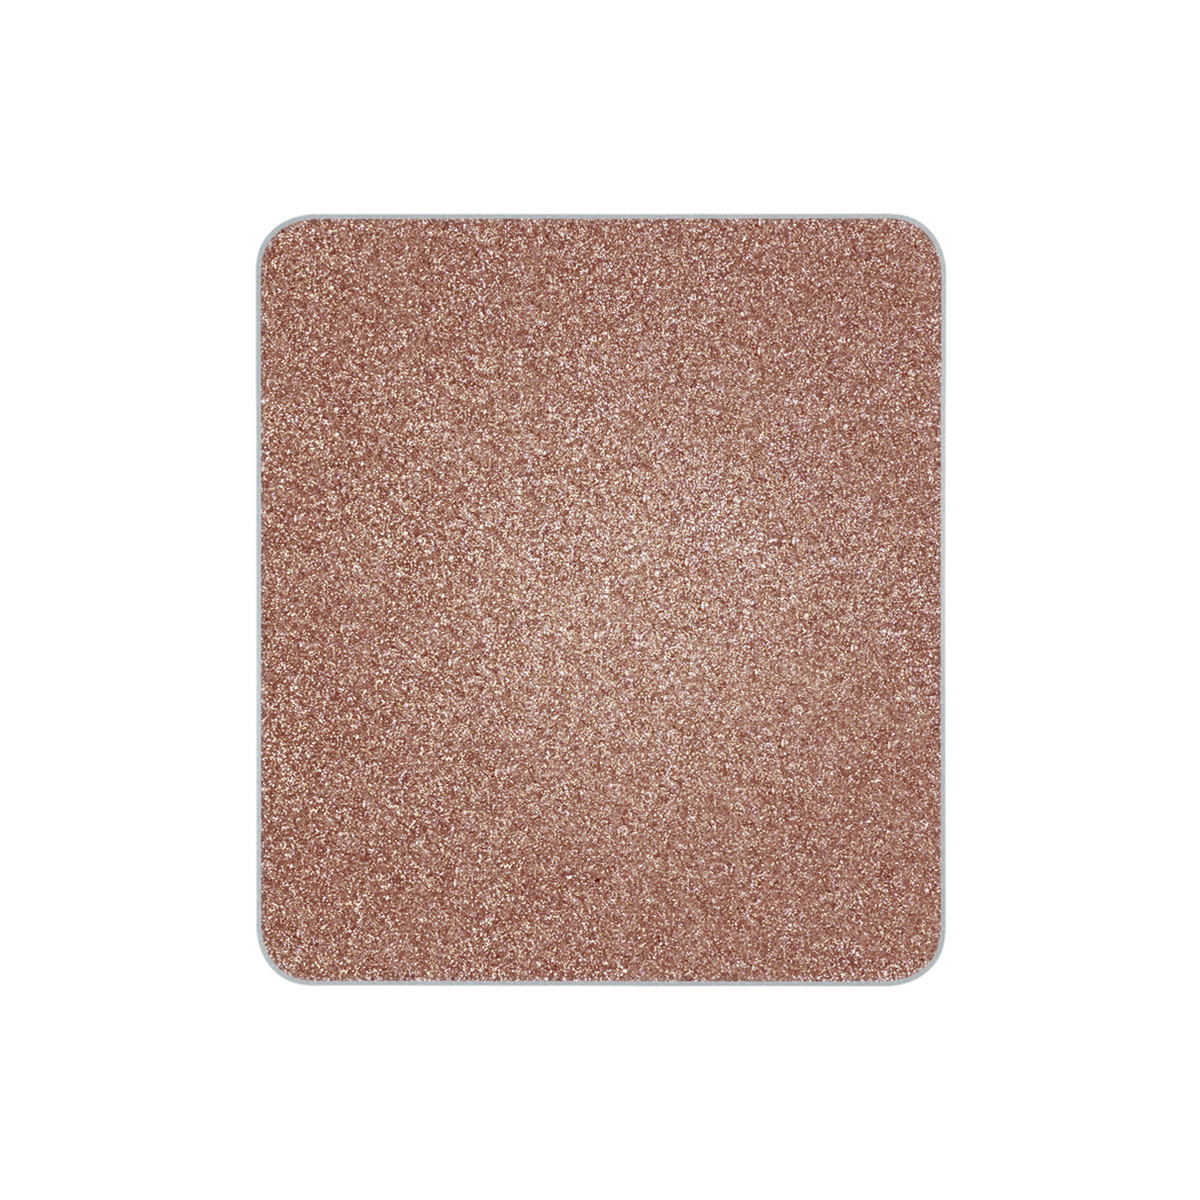 Iridescent-538 Pearly Gray Beige